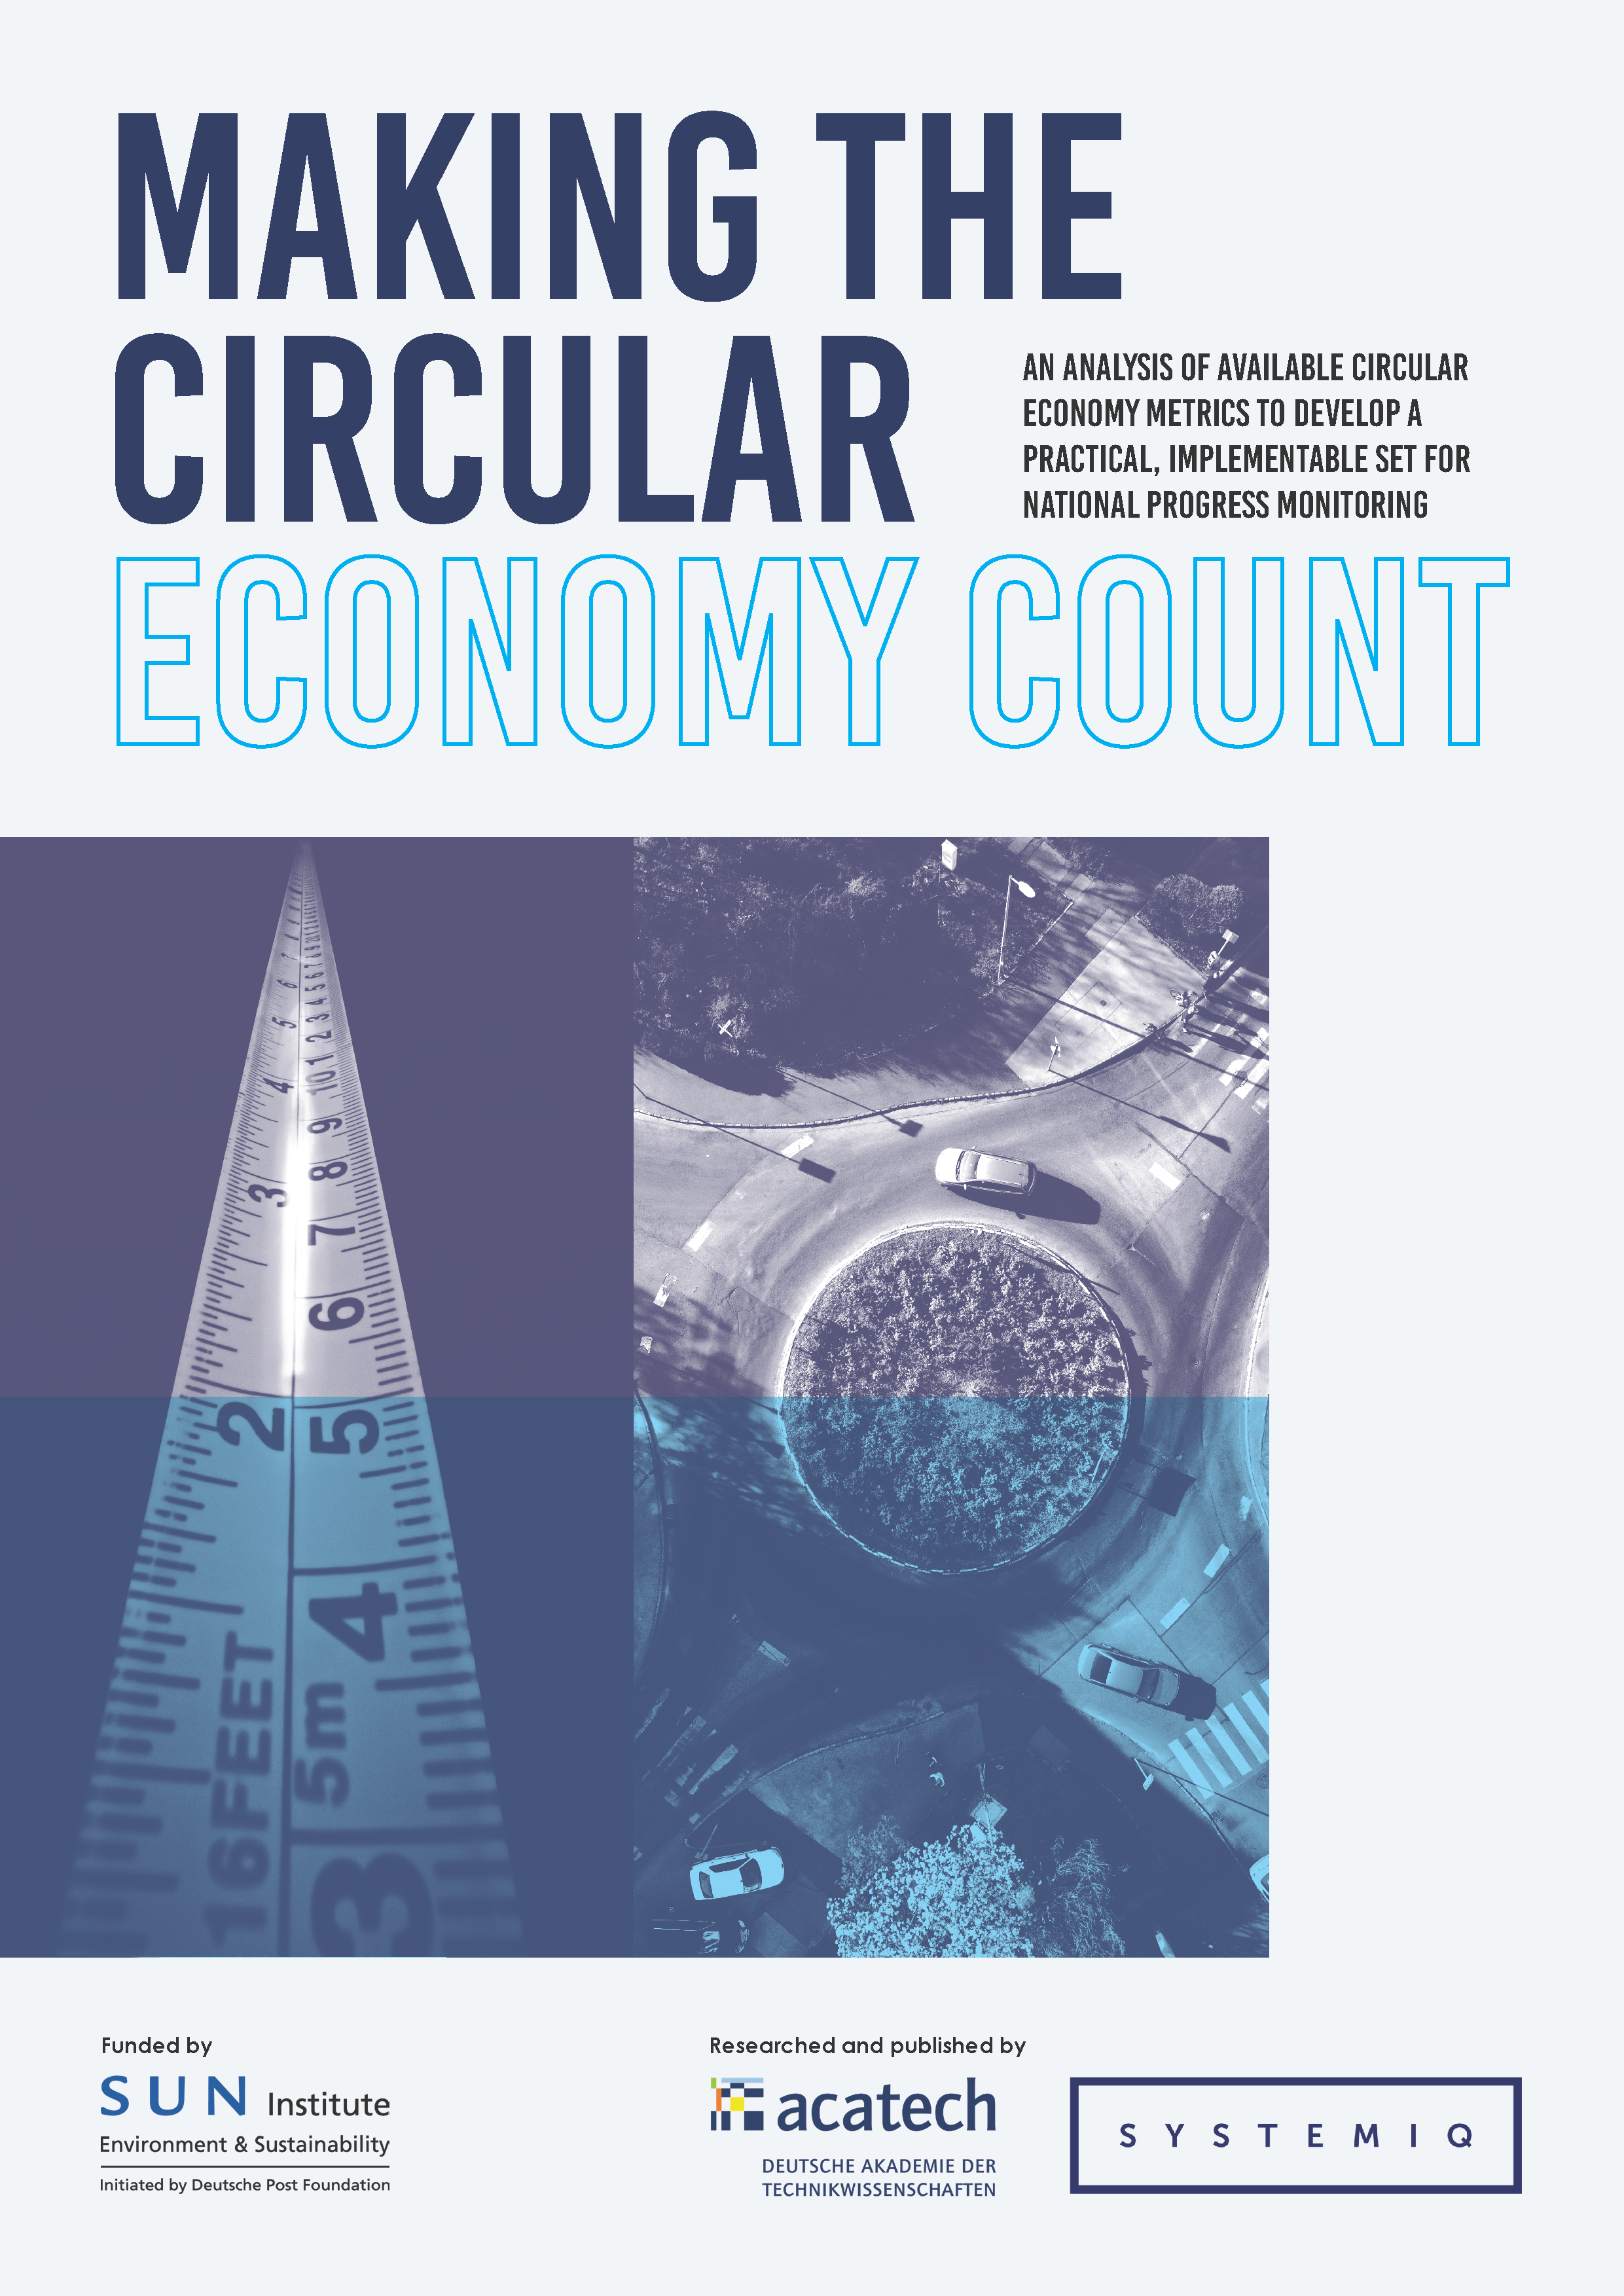 Making the Circular Economy Count